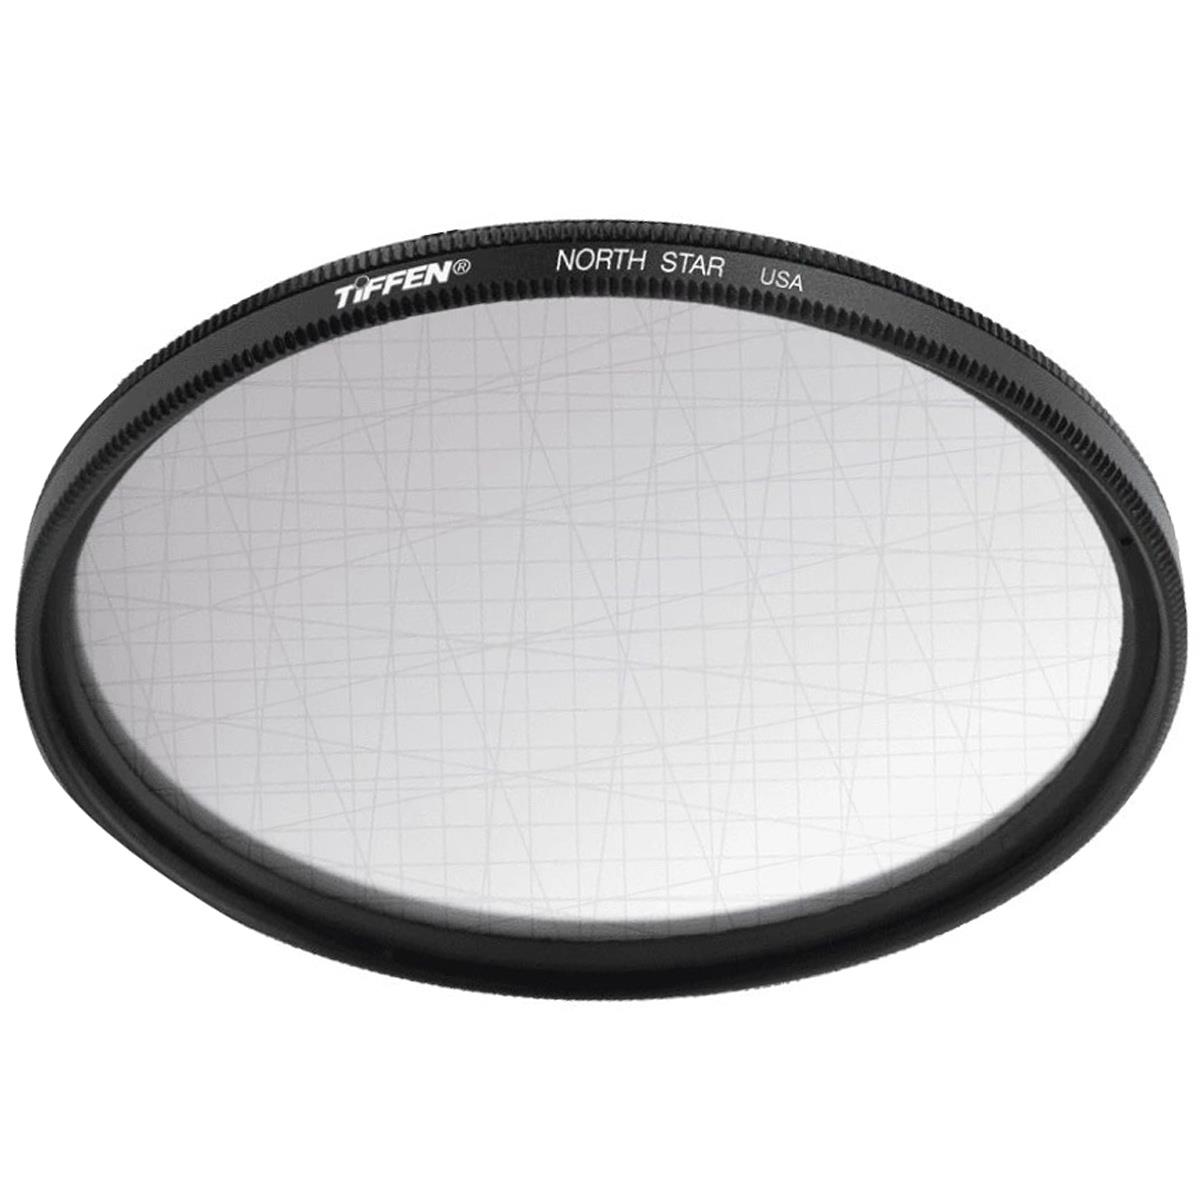 Image of Tiffen 49mm North Star/FX Special Star Effect Filter